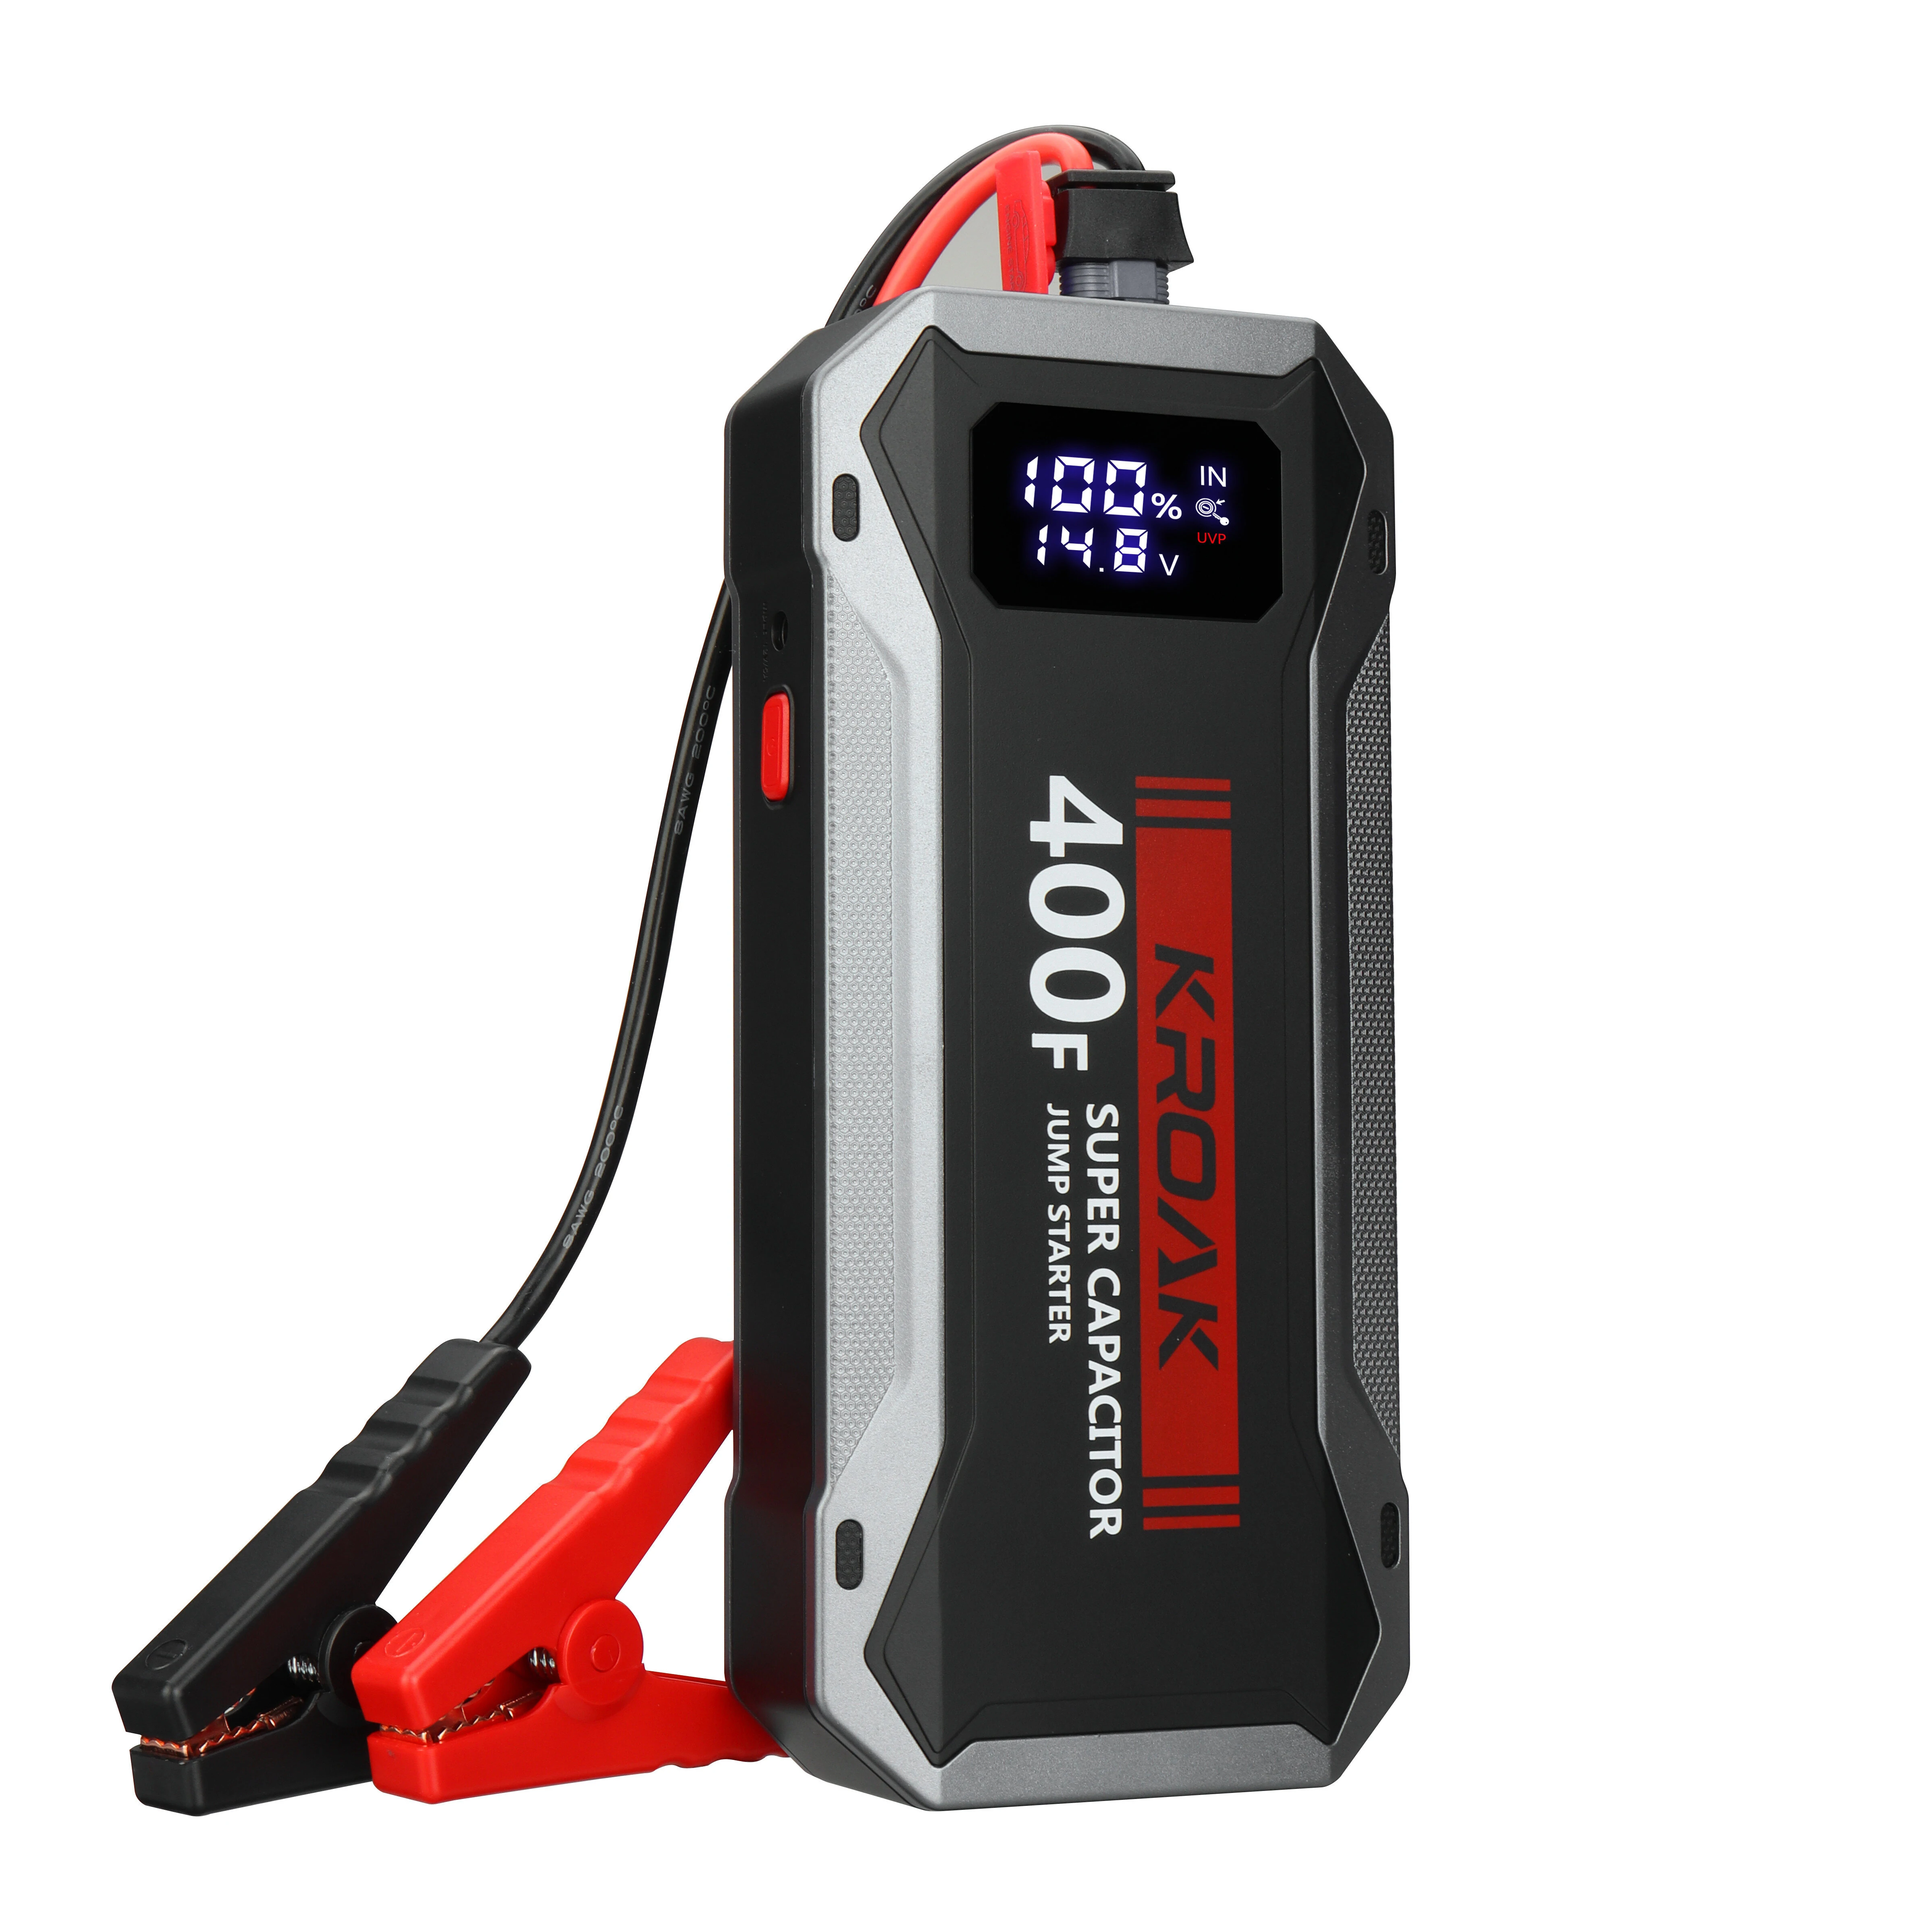 KROAK S300 1200A 400F Super Capacitor Jump Starter 12V Portable Car Jumper Emergency Battery Booster with Carrying Case Force Start Function